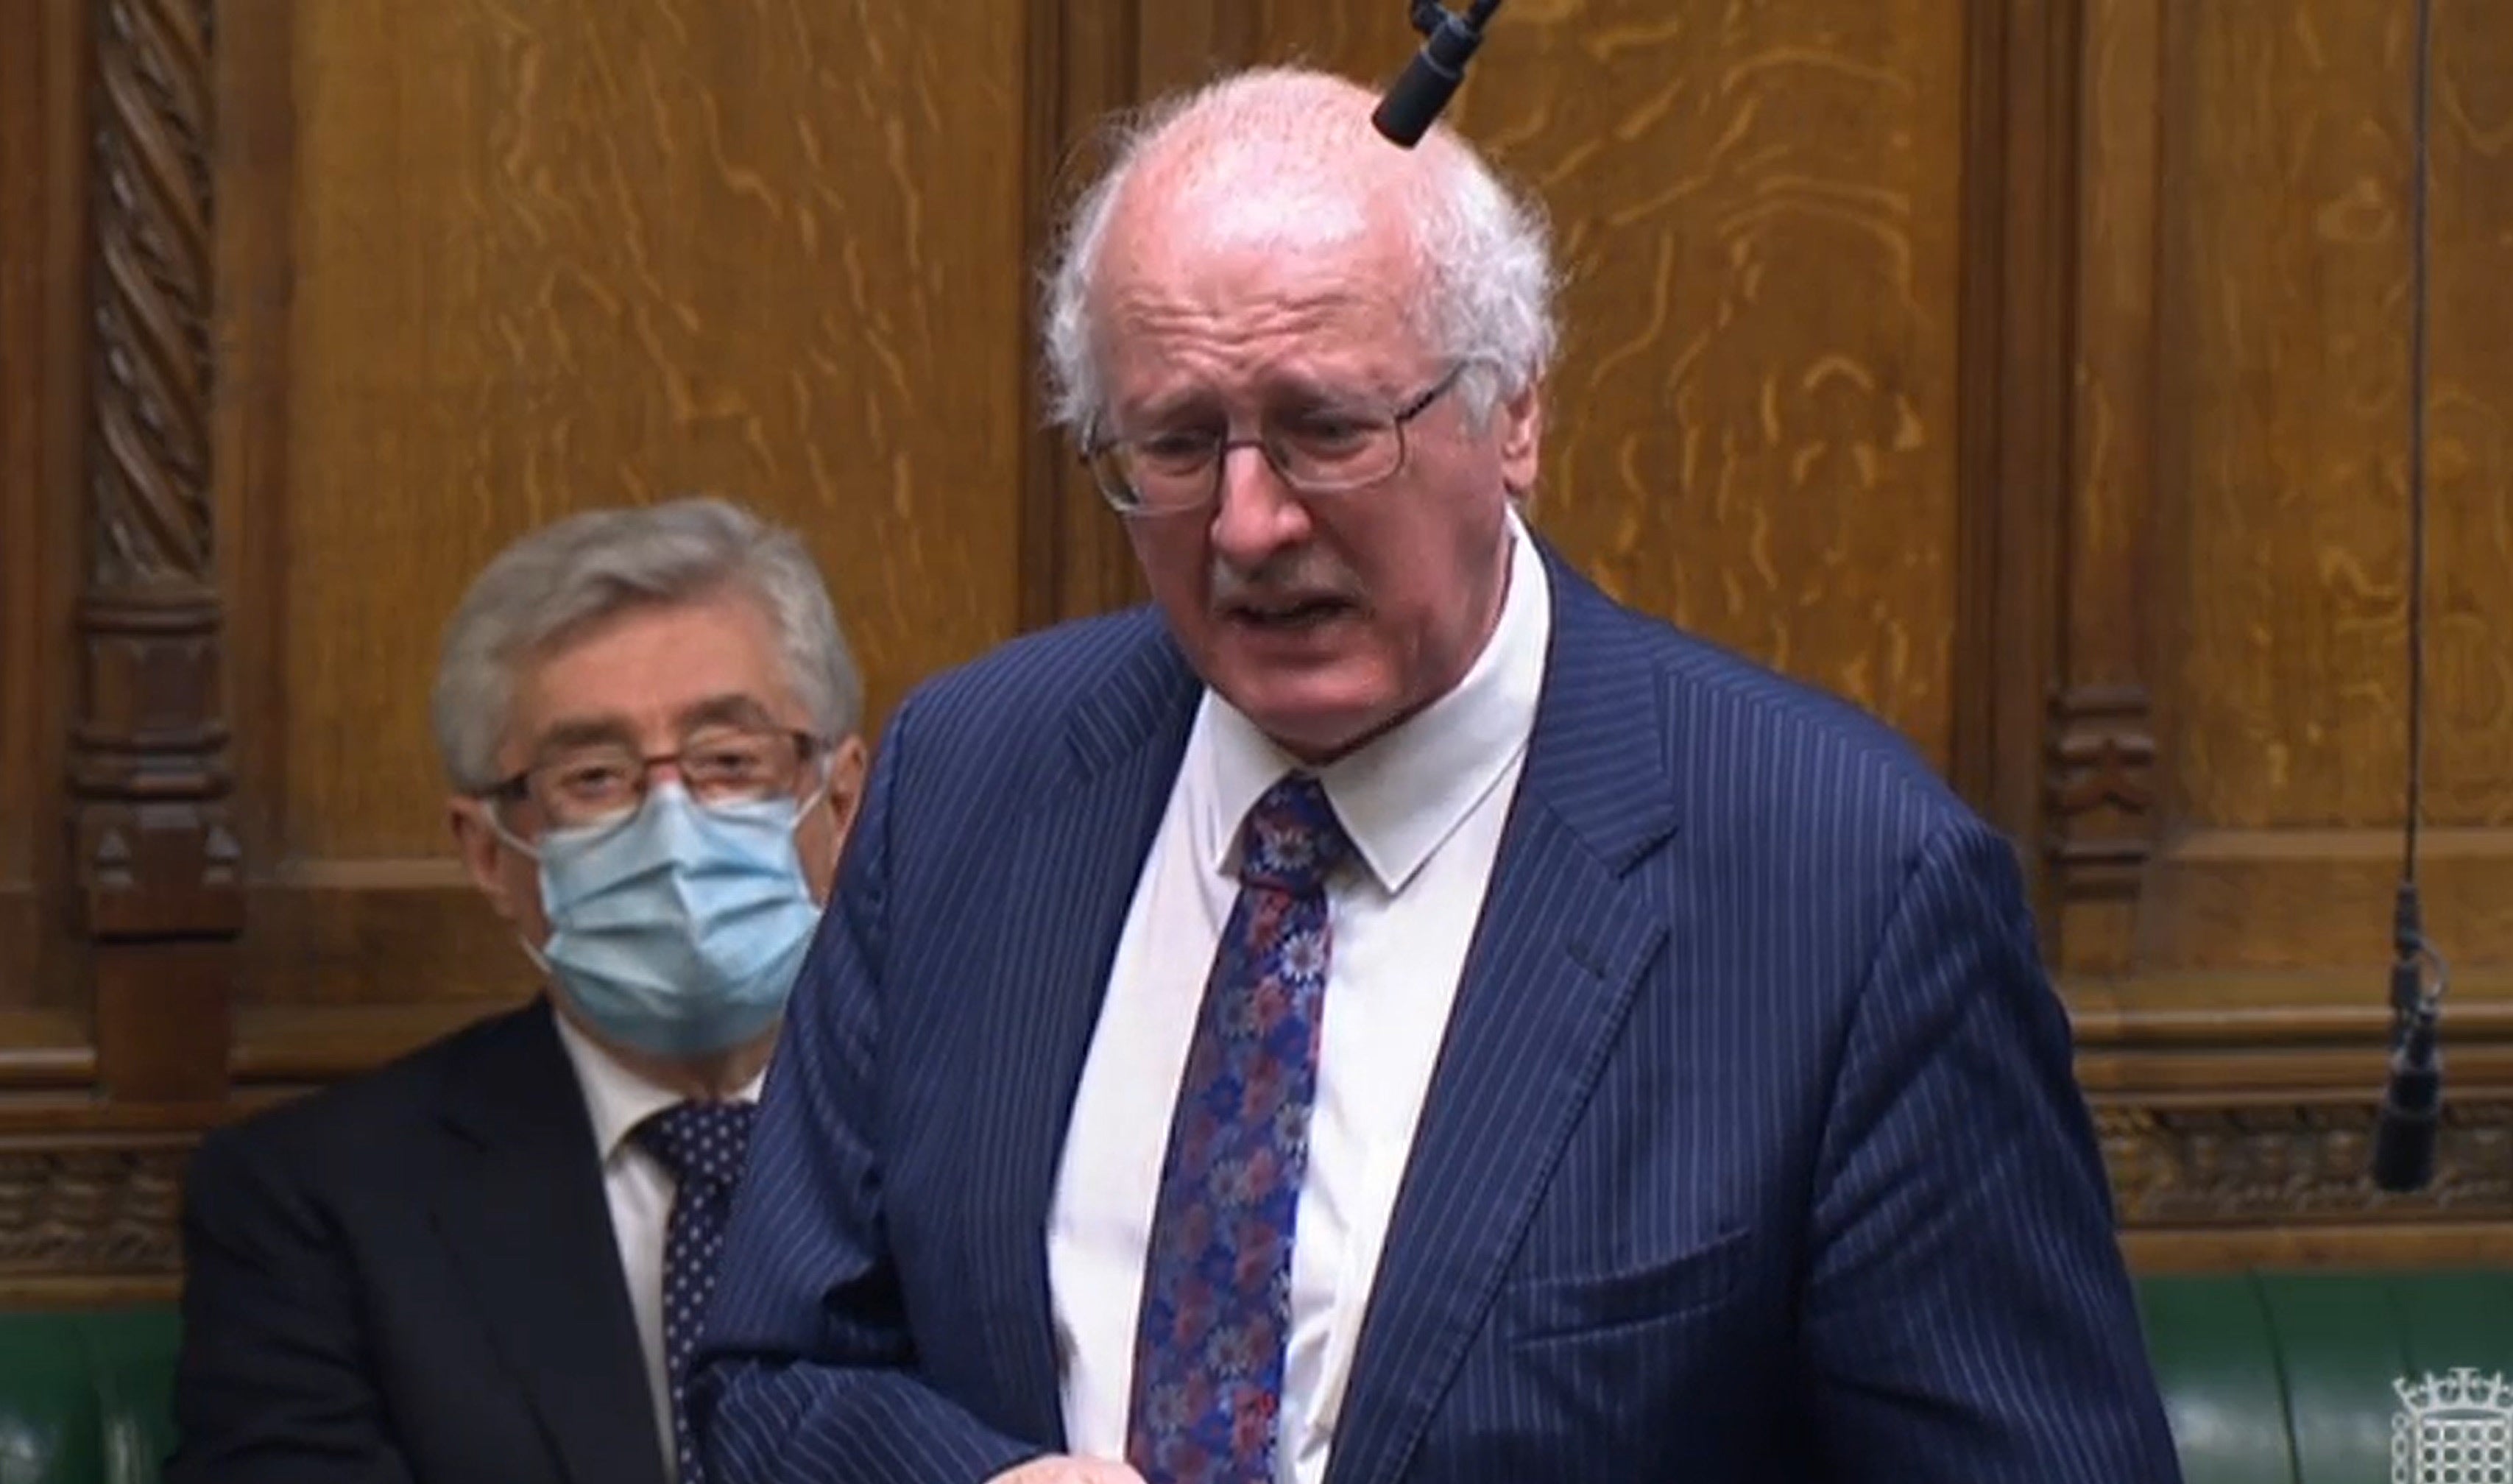 Jim Shannon became emotional in the House of Commons (House of Commons/PA)